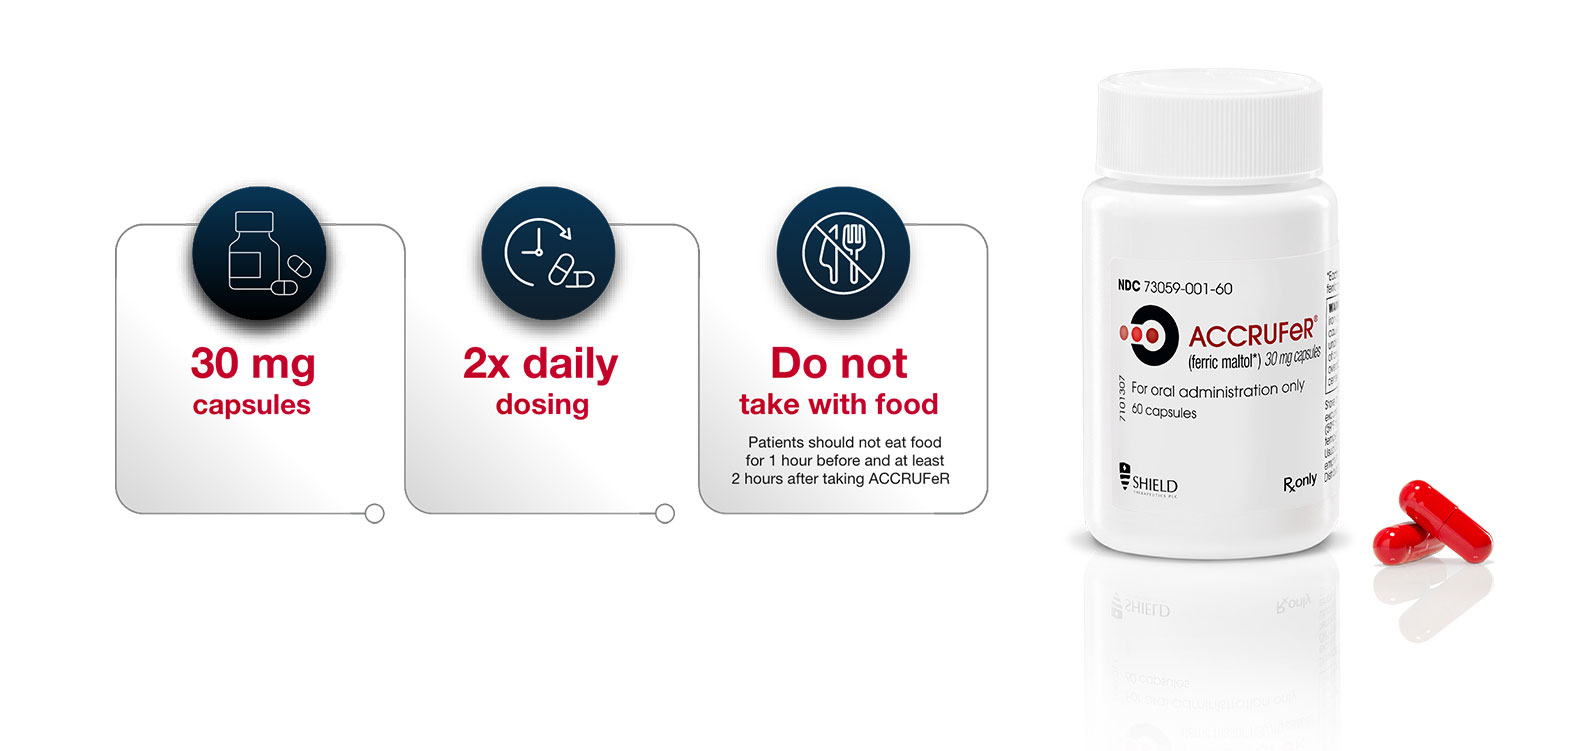 Accrufer dosing image which shows 30mg capsules, dosing information, which states 2x daily, and information about not taking Accrufer with food for best results